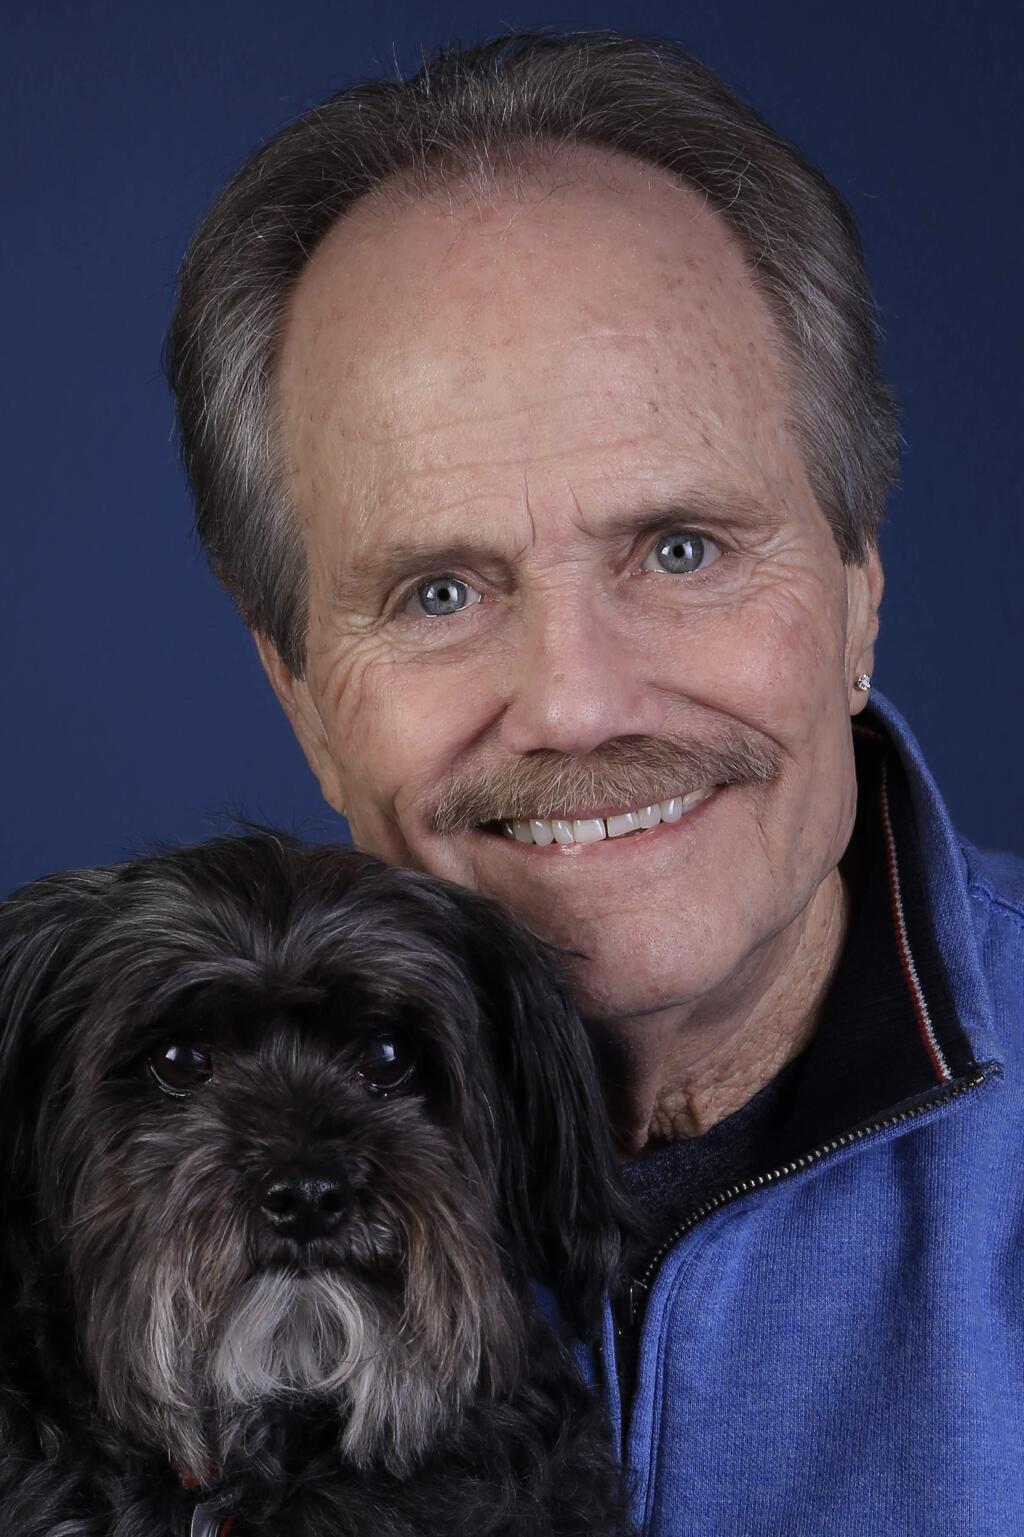 Sonoma County resident Jon Provost, who starred as Timmy on the 1950s TV series “Lassie” will appear at “An Evening with John Provost of ‘Lassie'” moderated by Jan Wahl, at the Sebastiani Theatre in Sonoma on Monday, Feb. 24, 2020. (RONEPHOTO)